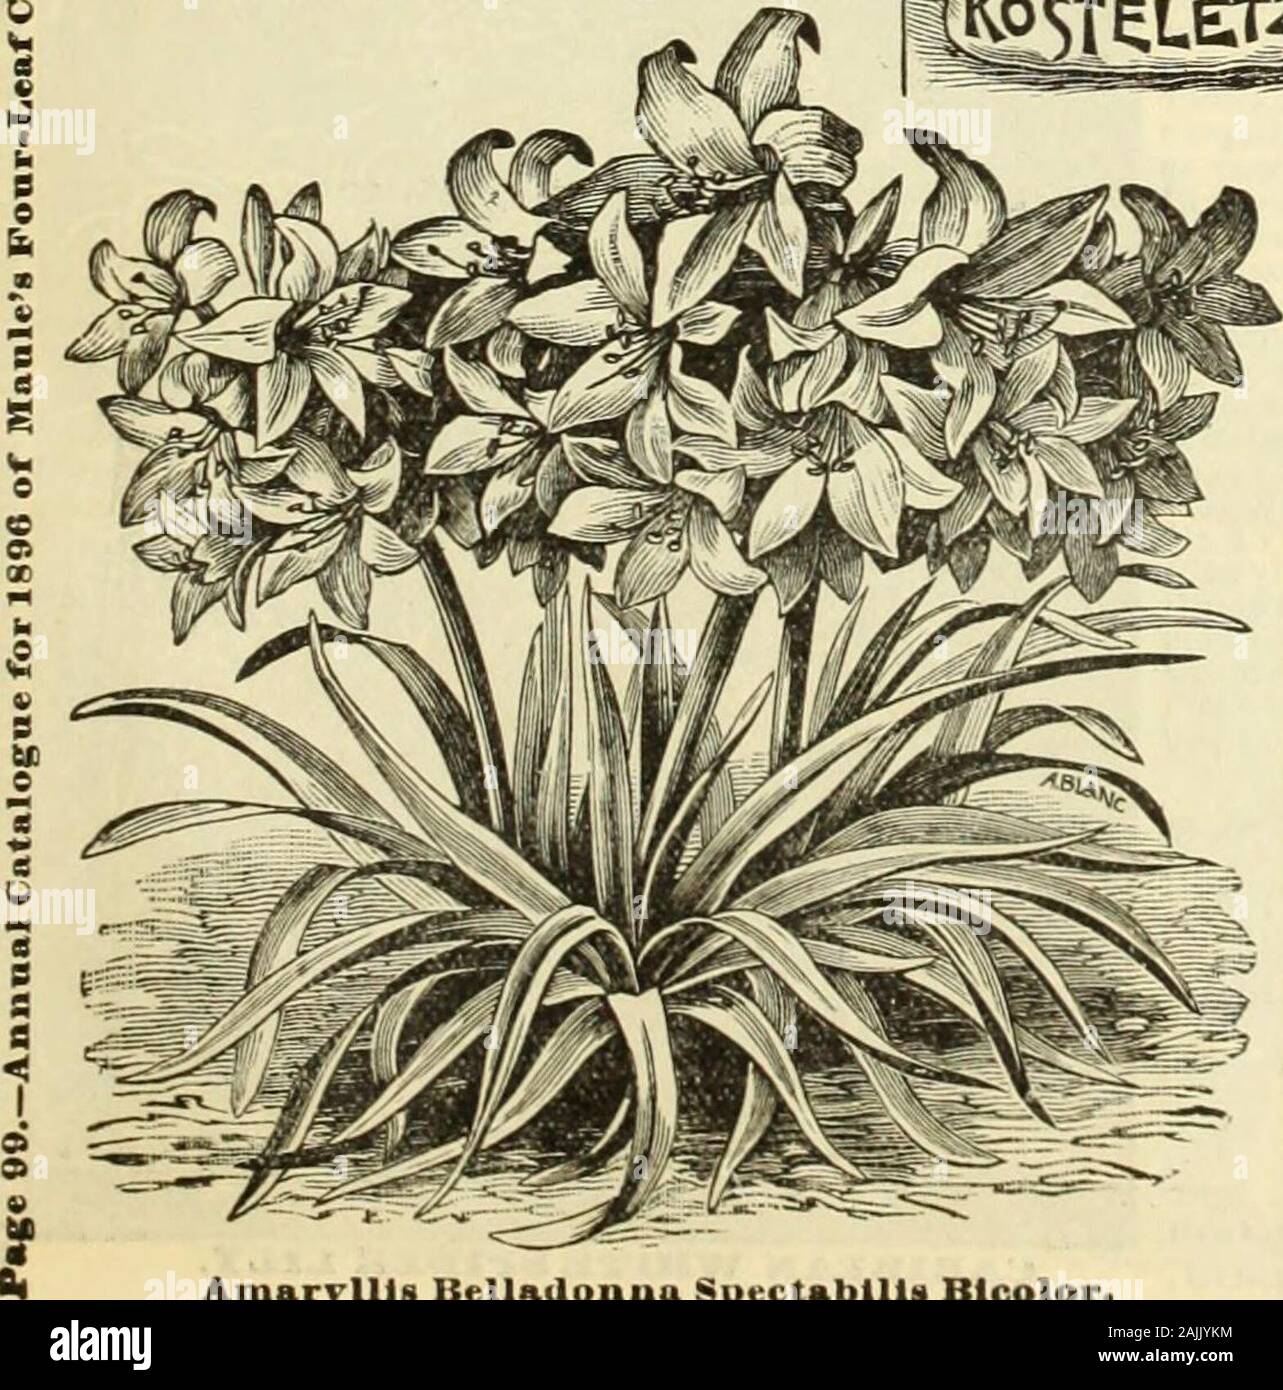 Maule's seed catalogue : 1896 . In almost anykind of soil, but prefer one that is richand moist and in an open situation. Theflowers are excellent to cut. They are ro-bust growers, and flourish in any garden.15 cents each; 4 for 50 cents; 31.25 per doz. AMARYLLIS BELLADONNASPECTABILIS BICOLOR. The finest of all the Belladonna Ijilies,its handsome and showy flowers beinglarger than tiiose of the ordinary species.The color of the flowers is white, a delicatecarnation at the base, and rose toward theupper part, striped or marbled in brightcarmine. The large umbels of this mag-nificent Amaryllis a Stock Photo